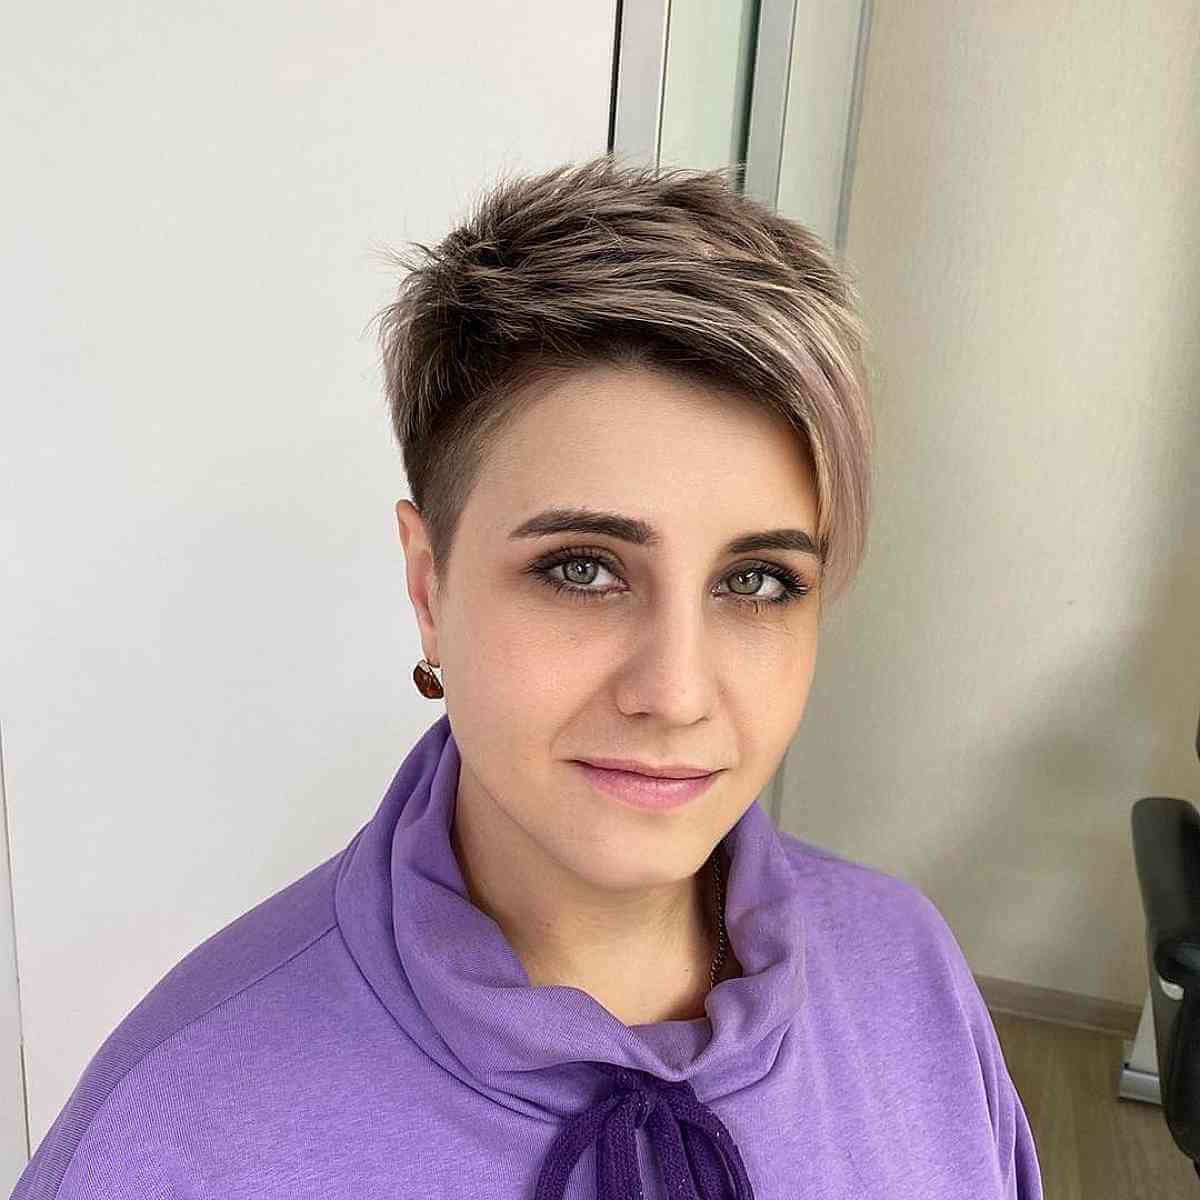 Asymmetrical Pixie with Highlights